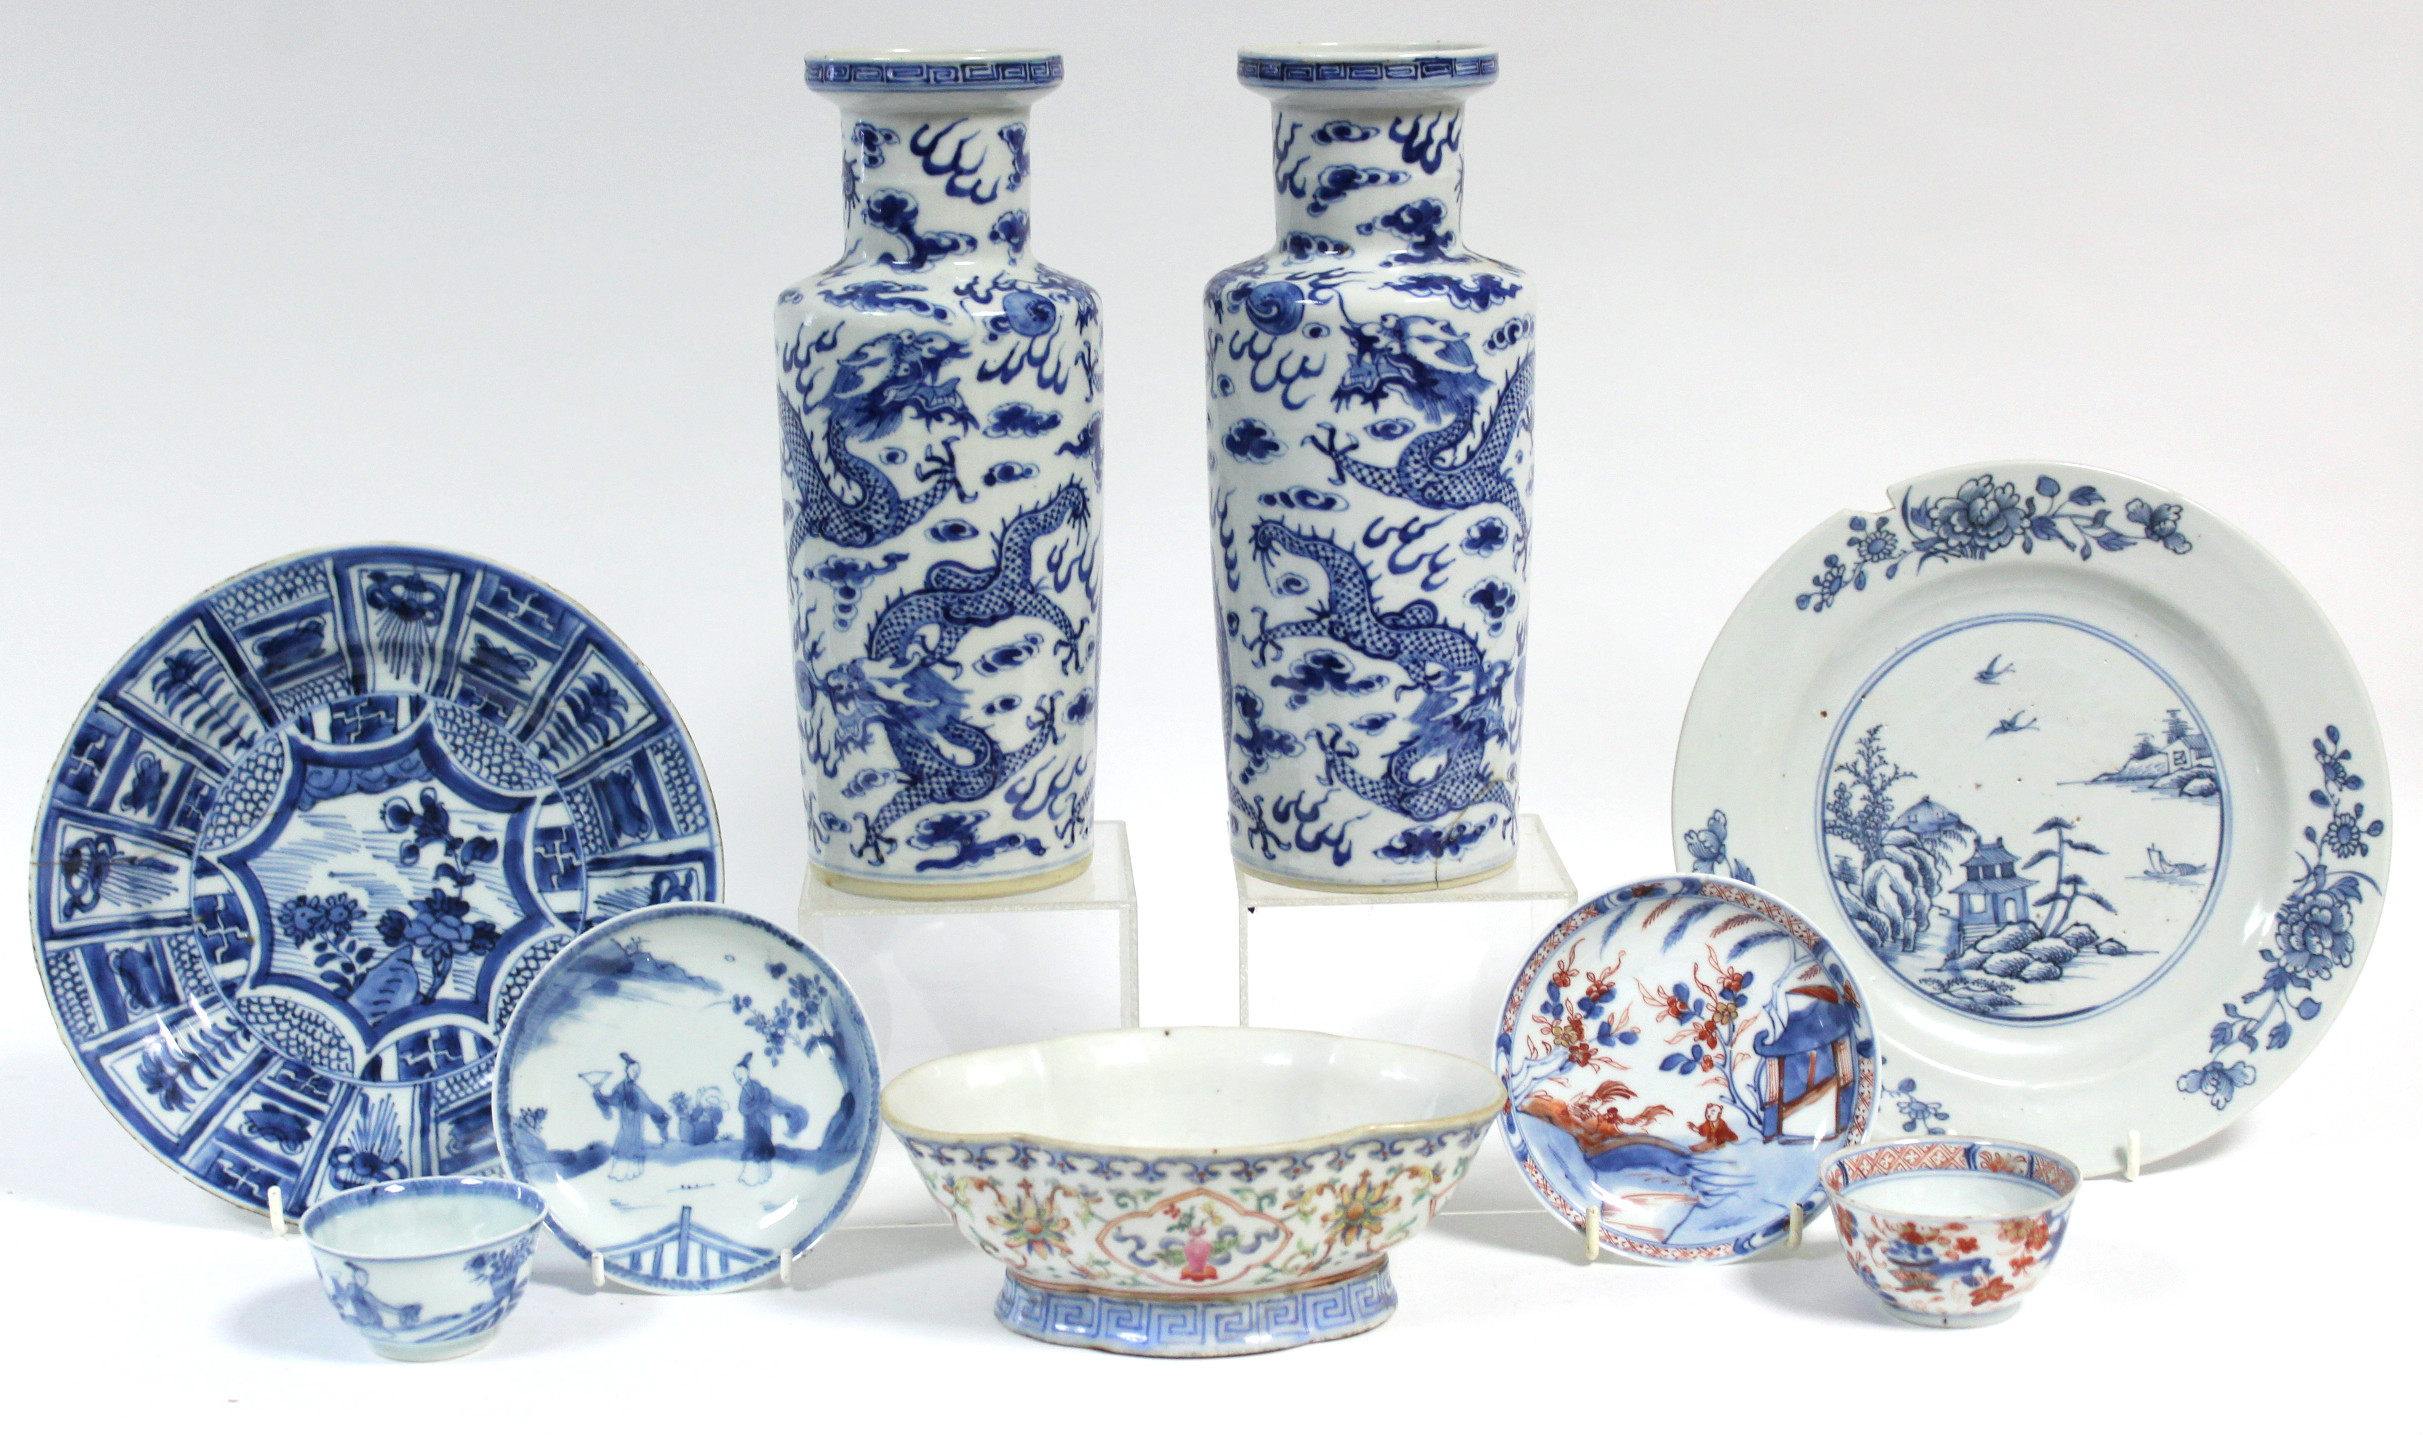 A pair of 19th century Chinese blue-&-white Rouleau vases with painted dragon decoration, 10”